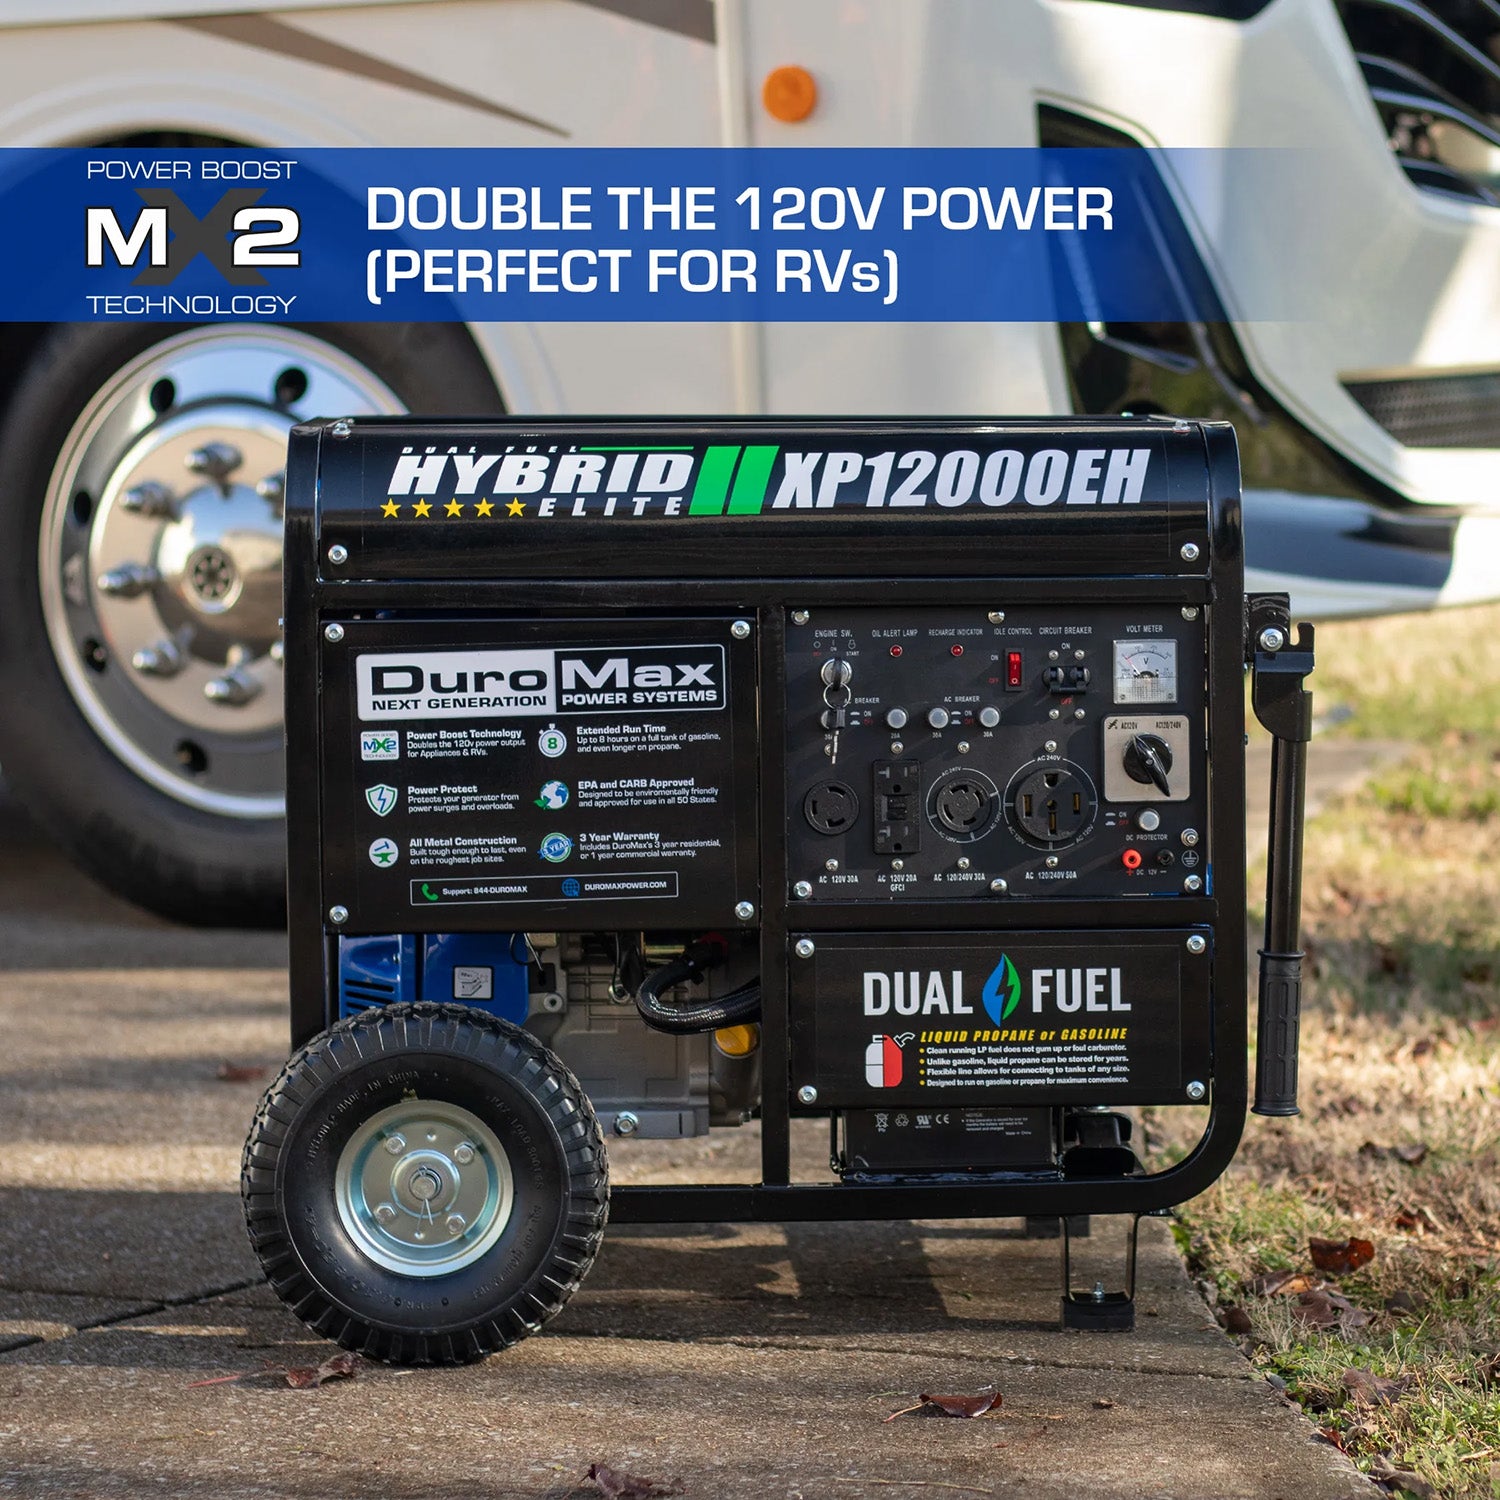 Power Boost M2 Technology Doubles The 120V Power Making It Perfect For RVs